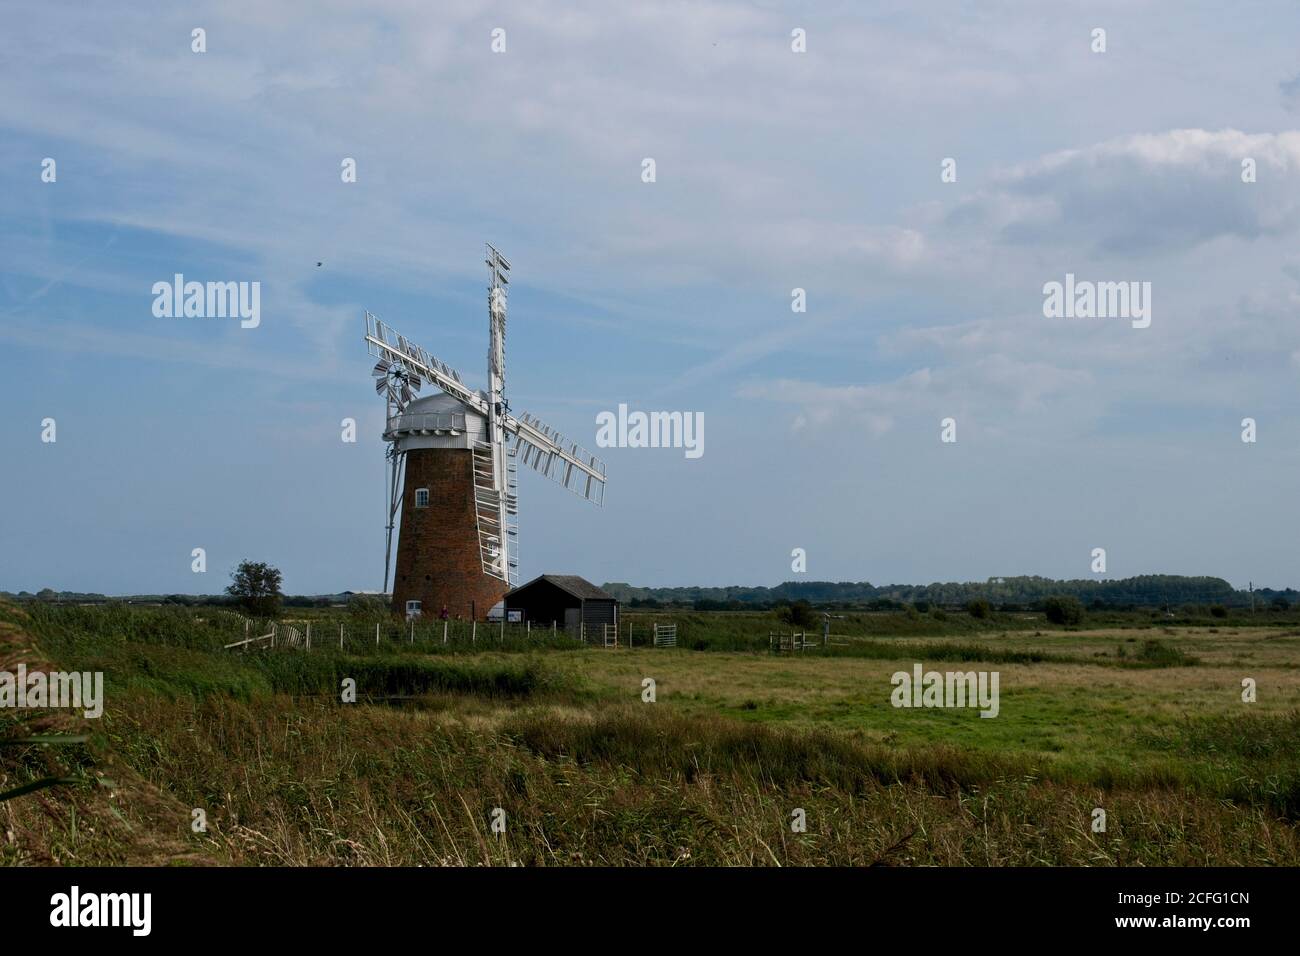 Restored Wind Pump at Horsey, Norfolk Broads. Sails static. Vegetation in foreground. Clear blue sky. Medium view. Sails side on to camera position. Stock Photo